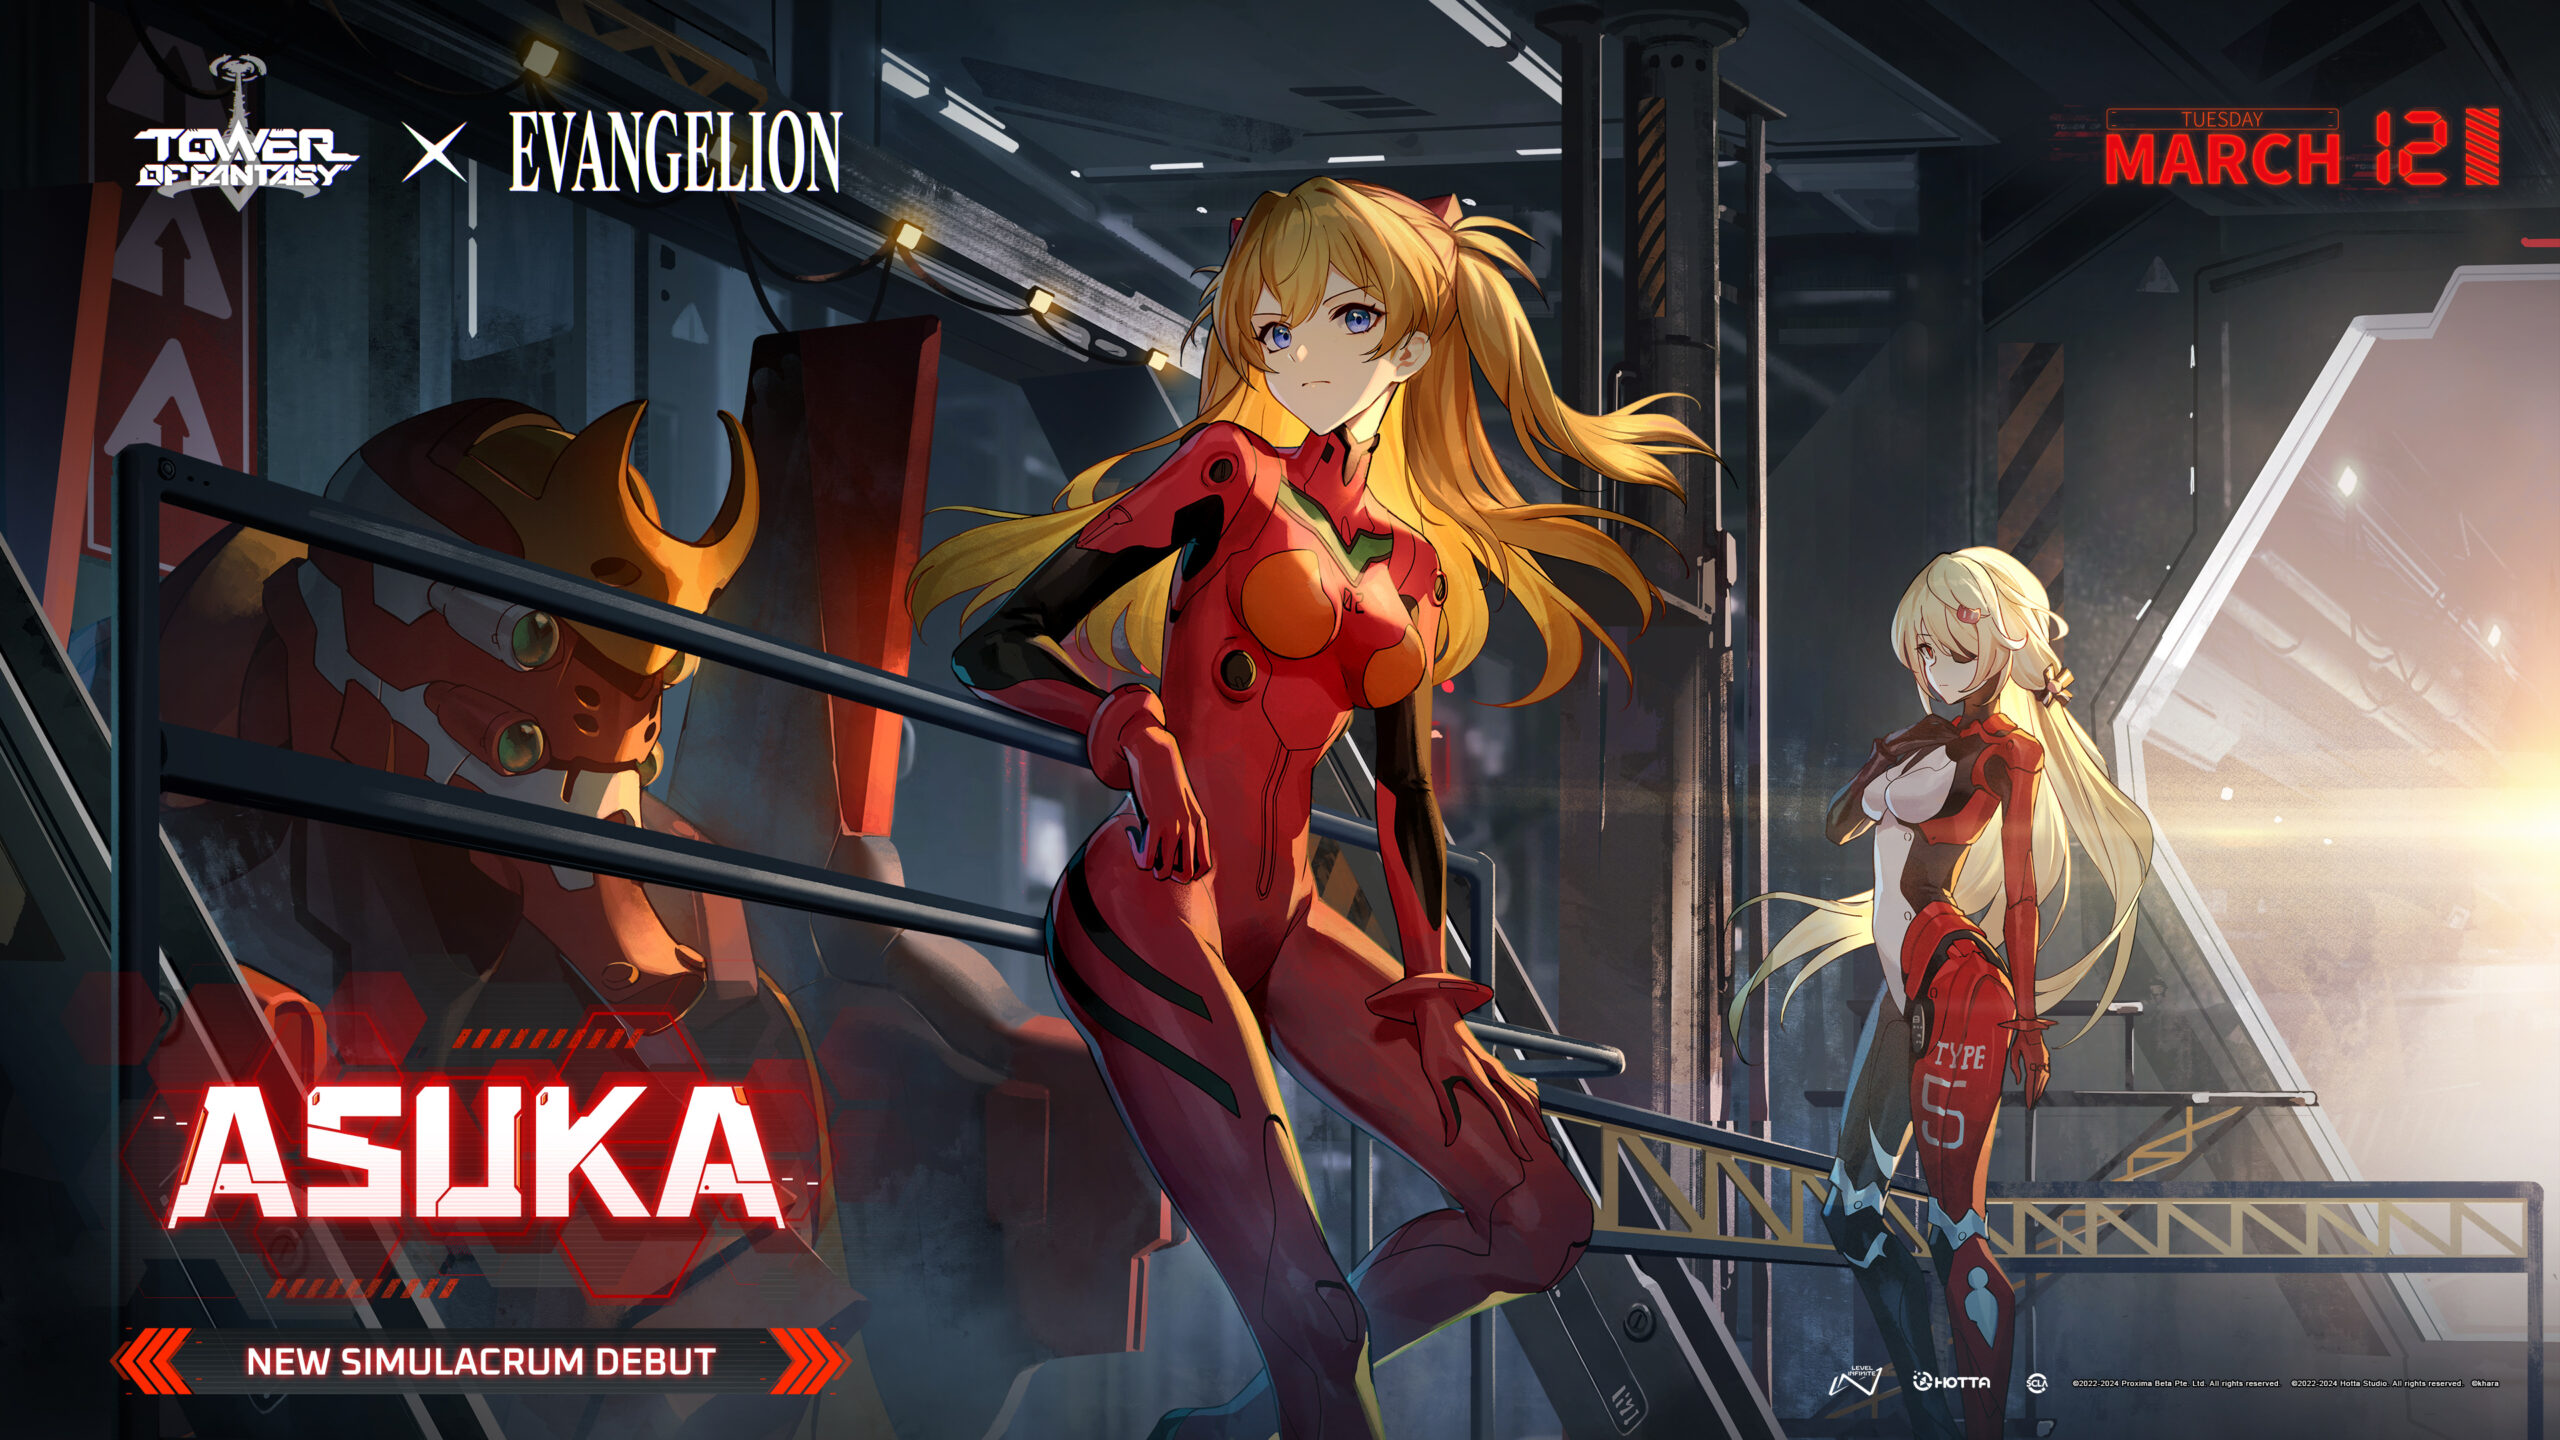 Tower of Fantasy Expands with New Simulacrum Asuka in Evangelion Collaboration